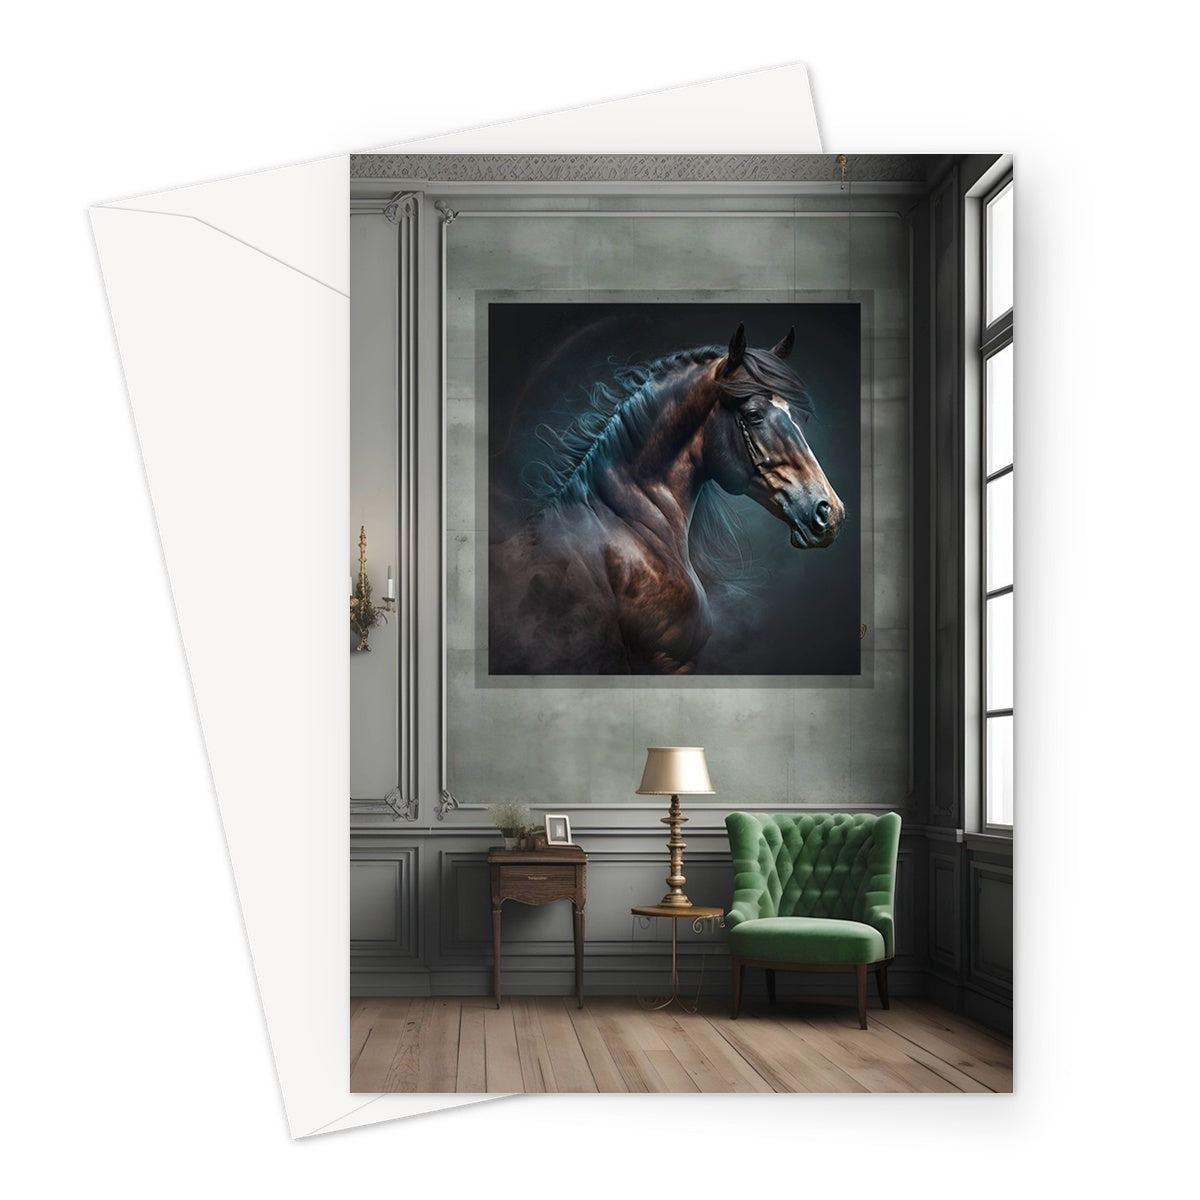 Room With A Horse Greeting Card